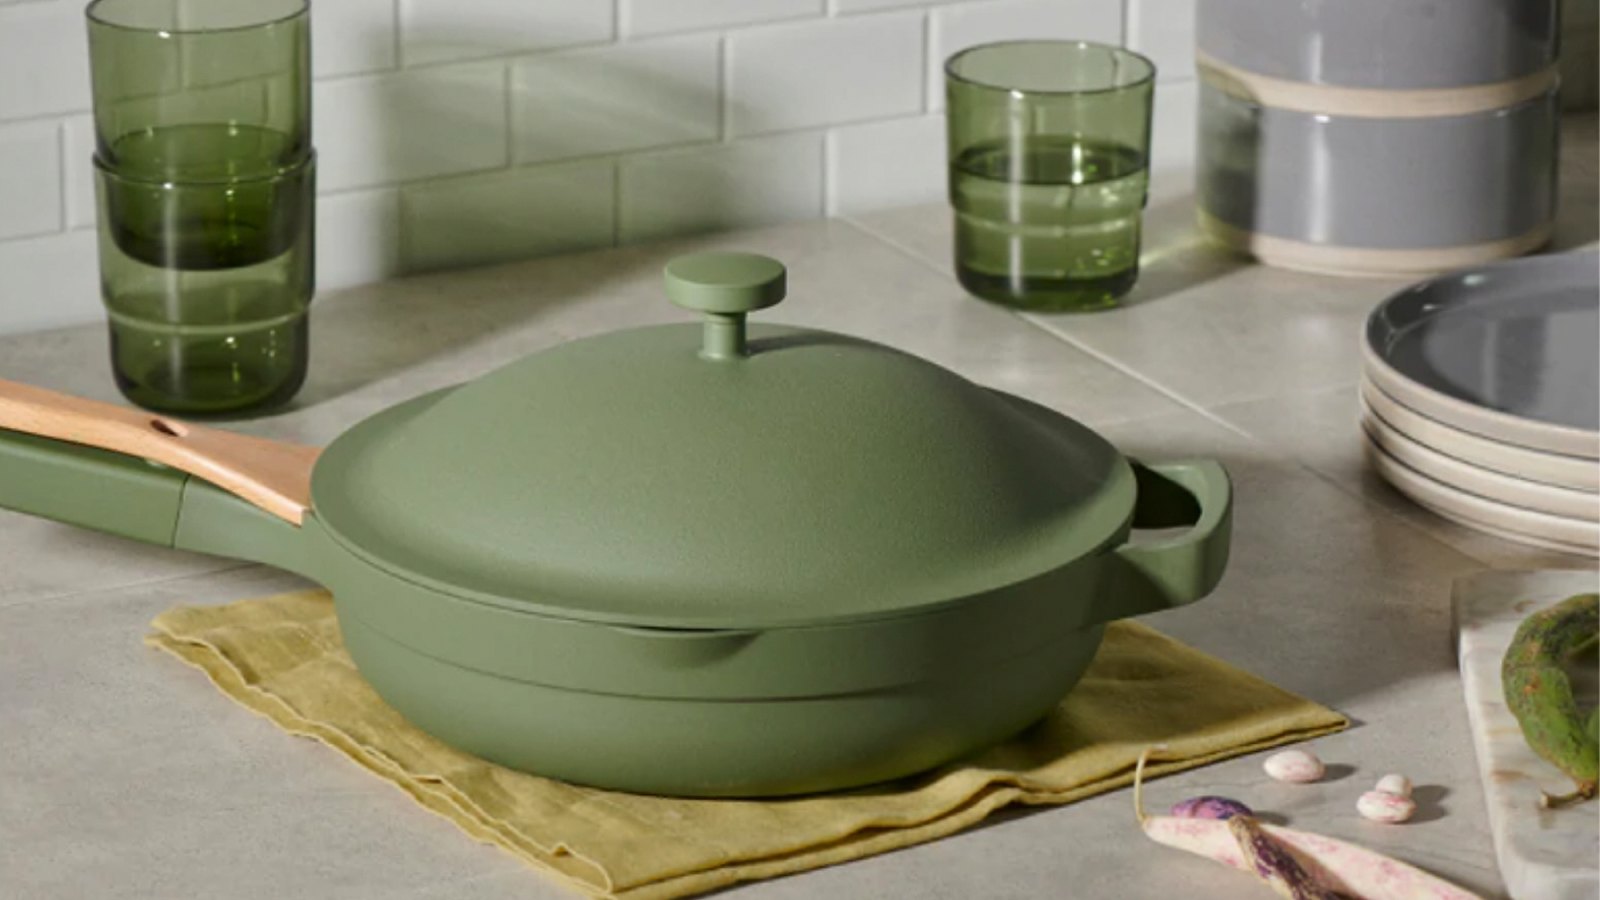 Our Place Launches a New Color of the Internet's Favorite Pan